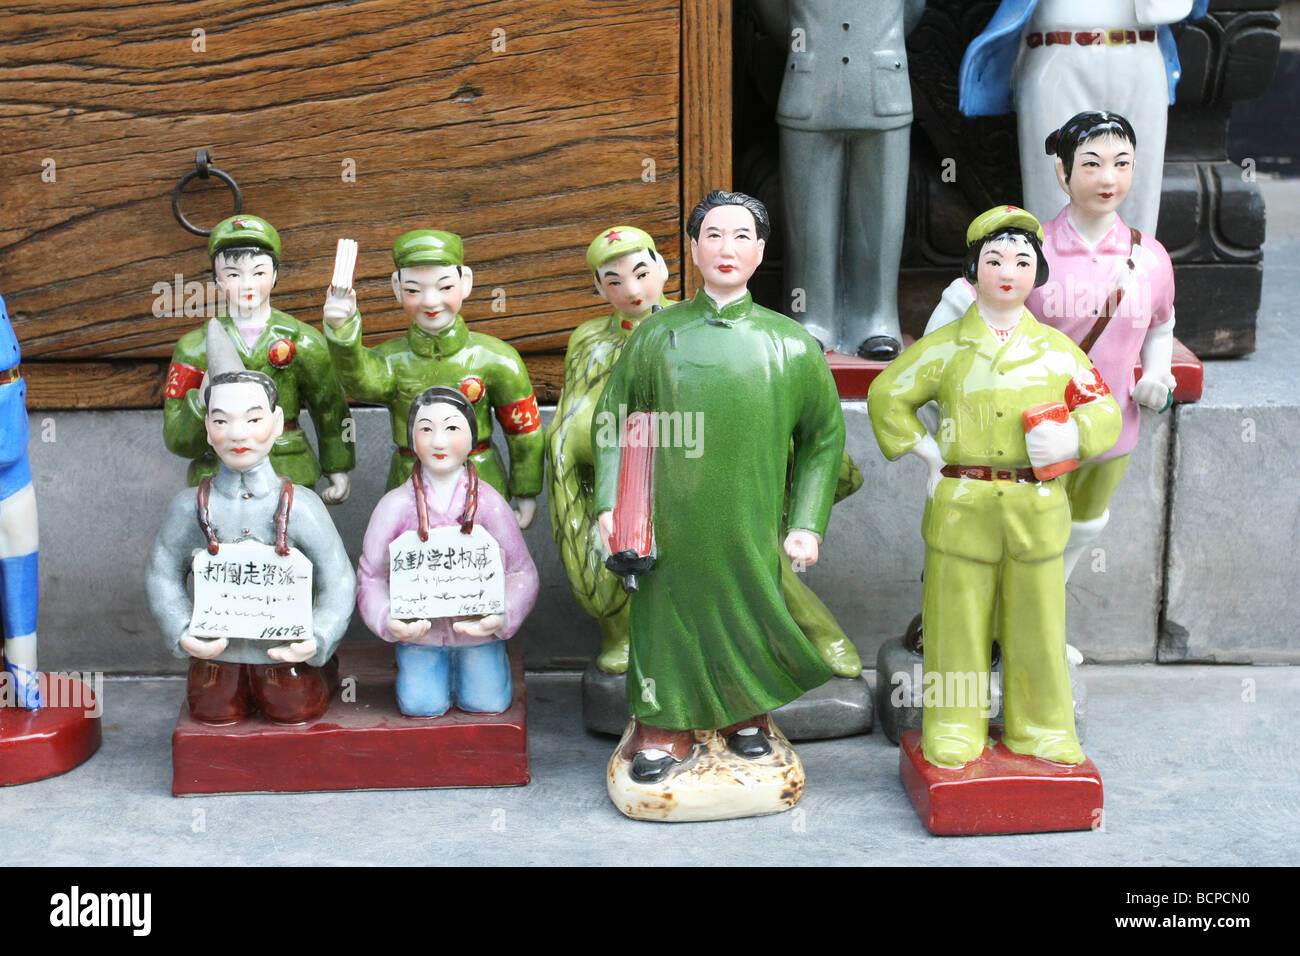 Clay statue depicting characters from Culture Revolution erra, Panjiayuan Antique Market, Beijing, China Stock Photo